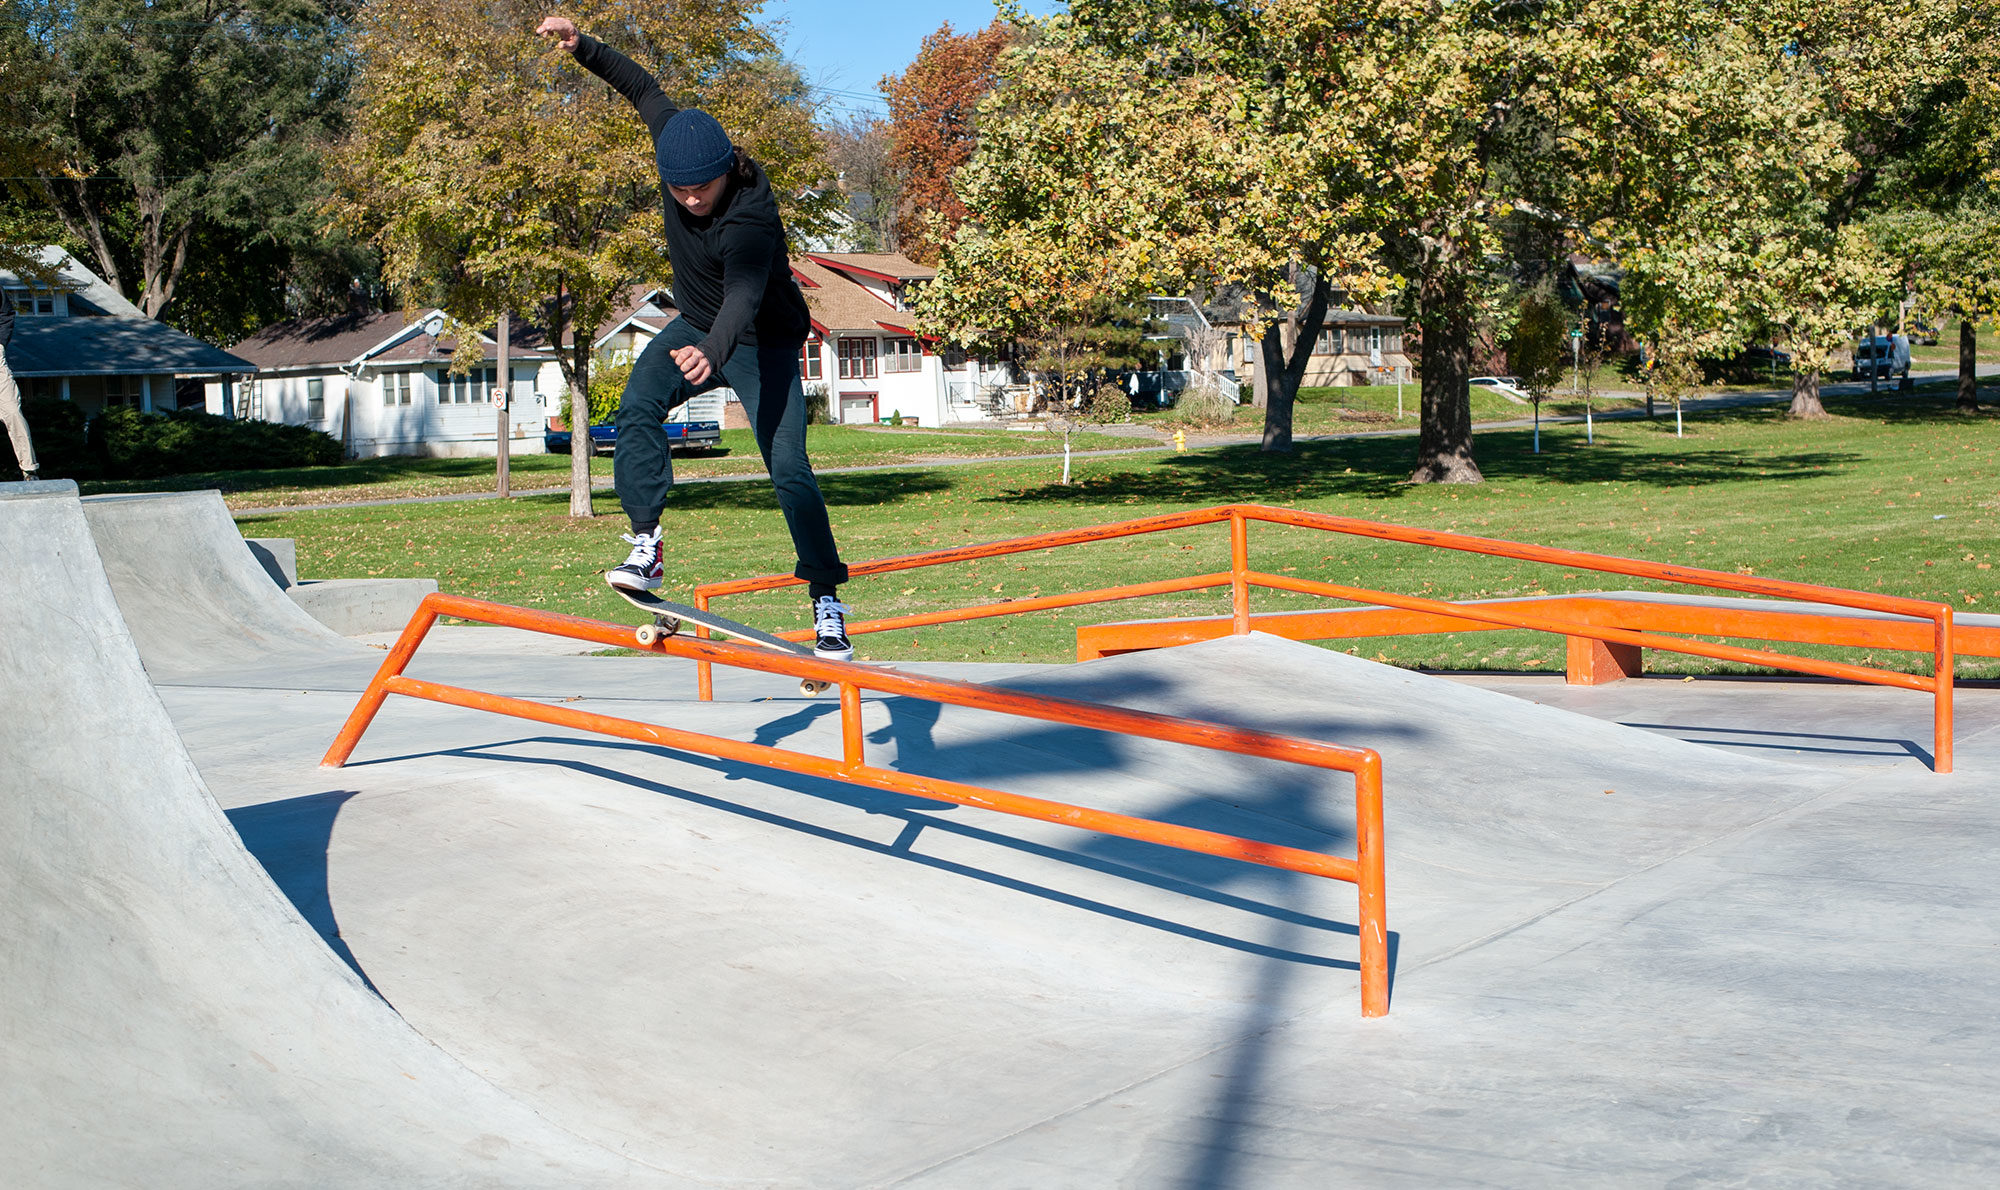 Frontside smith at West Des Moines Iowa Skatepark by Spohn Ranch